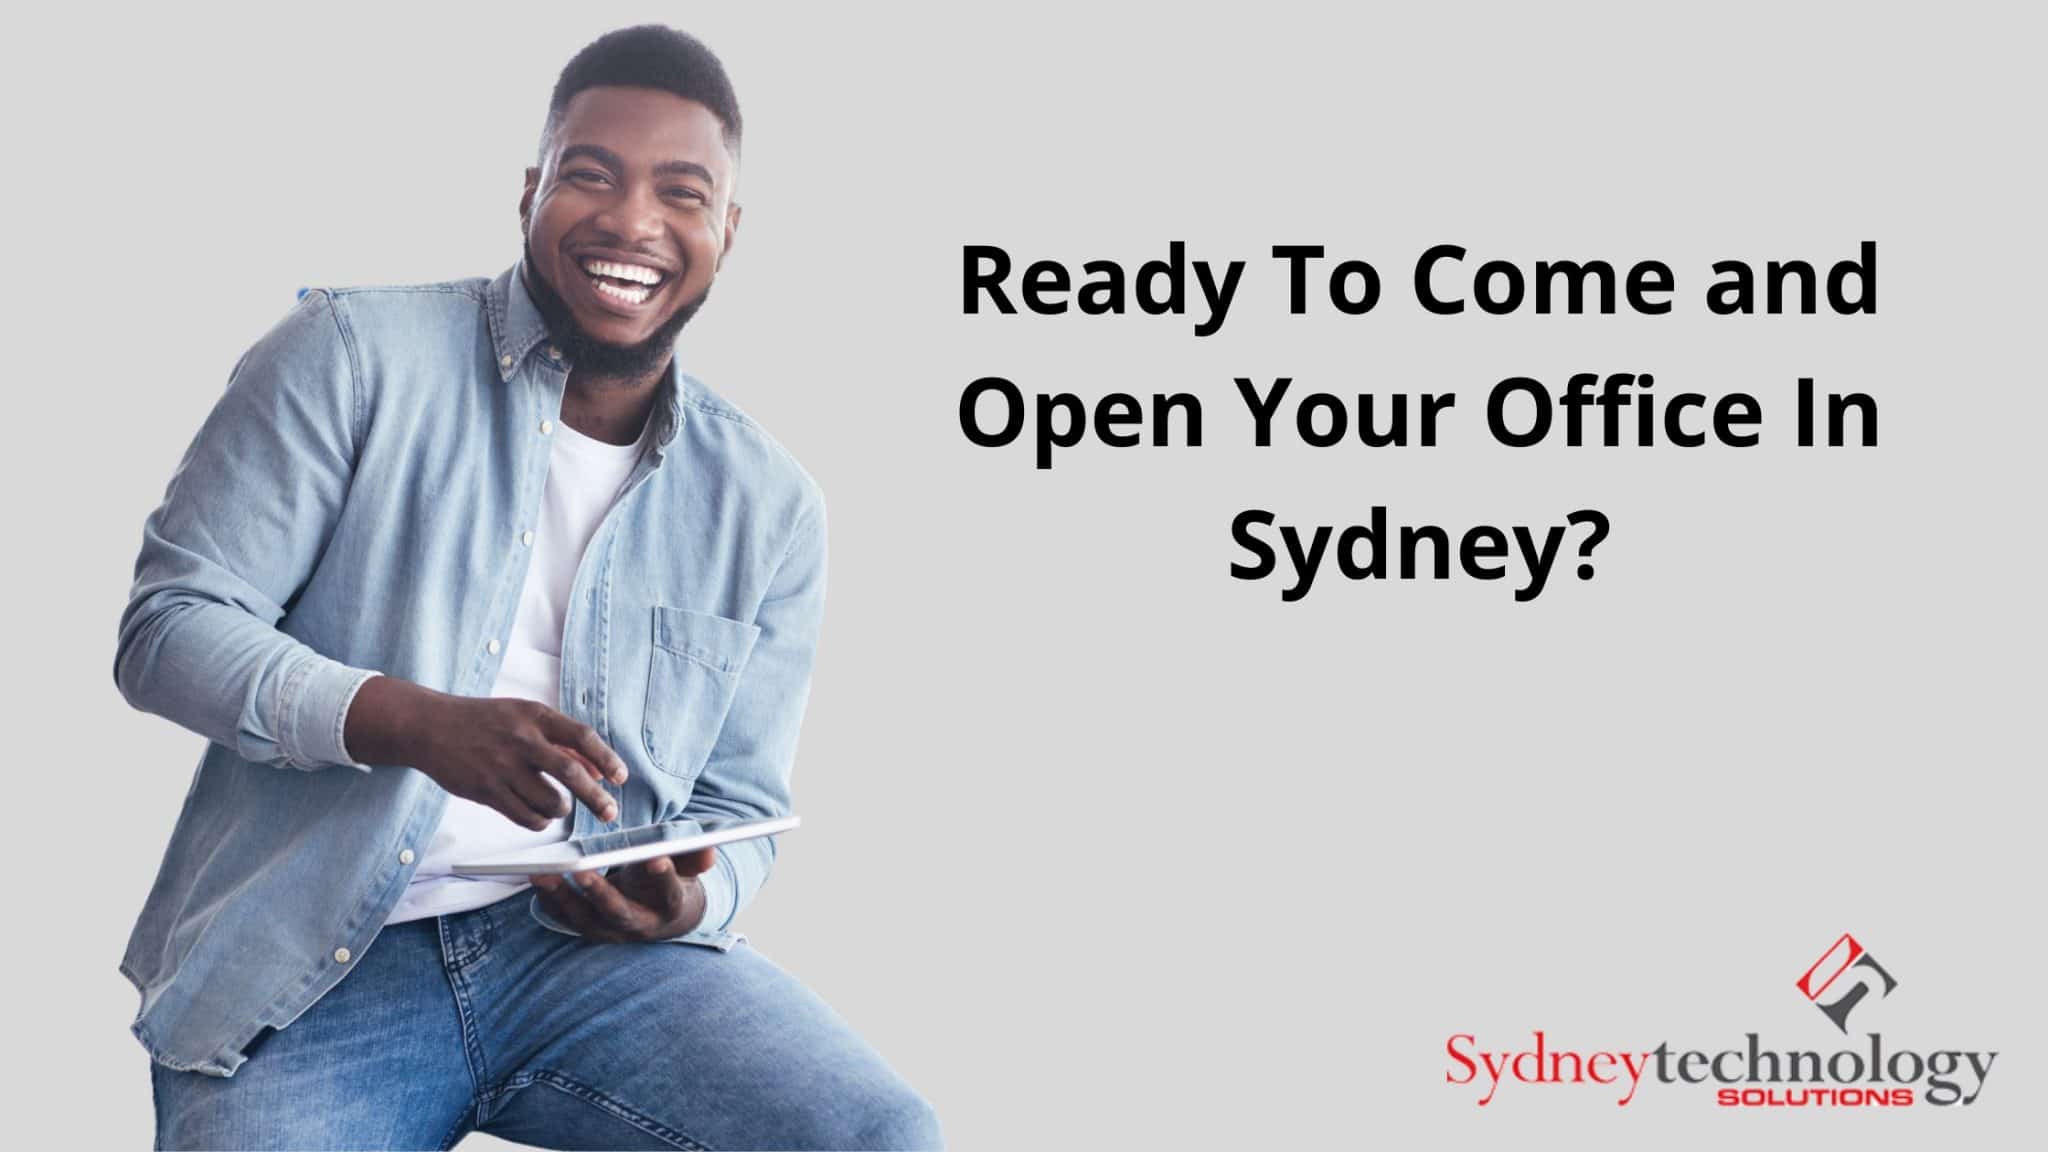 Ready To Come and Open Your Office In Sydney